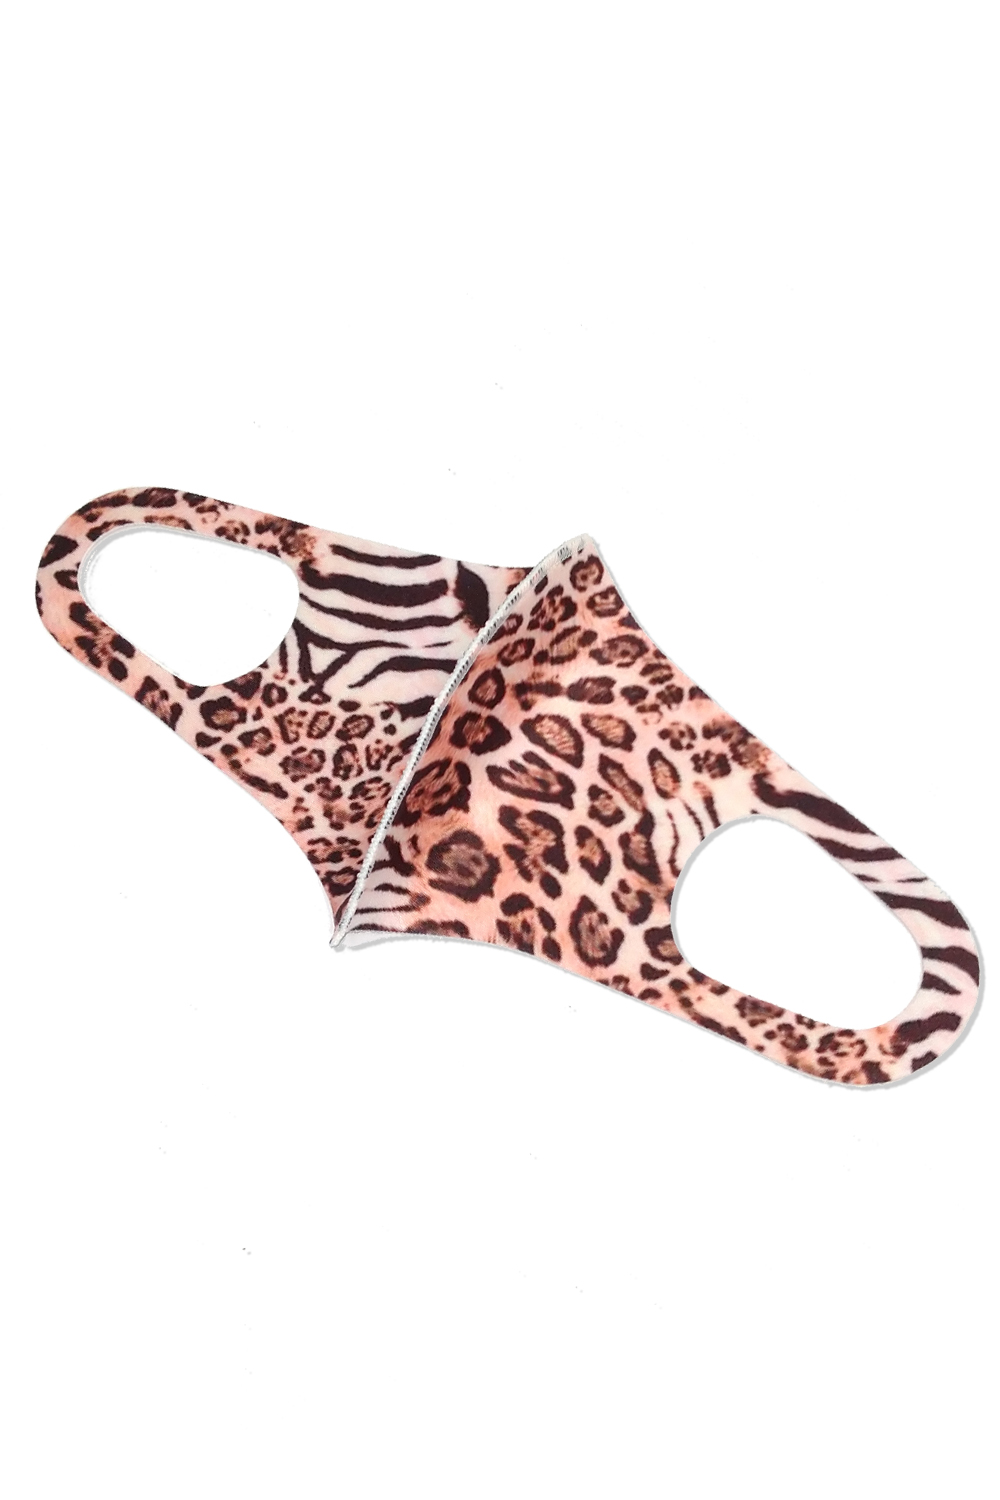 PINK Animal Fast Drying Fashion Face Mask, Image 4 of 4